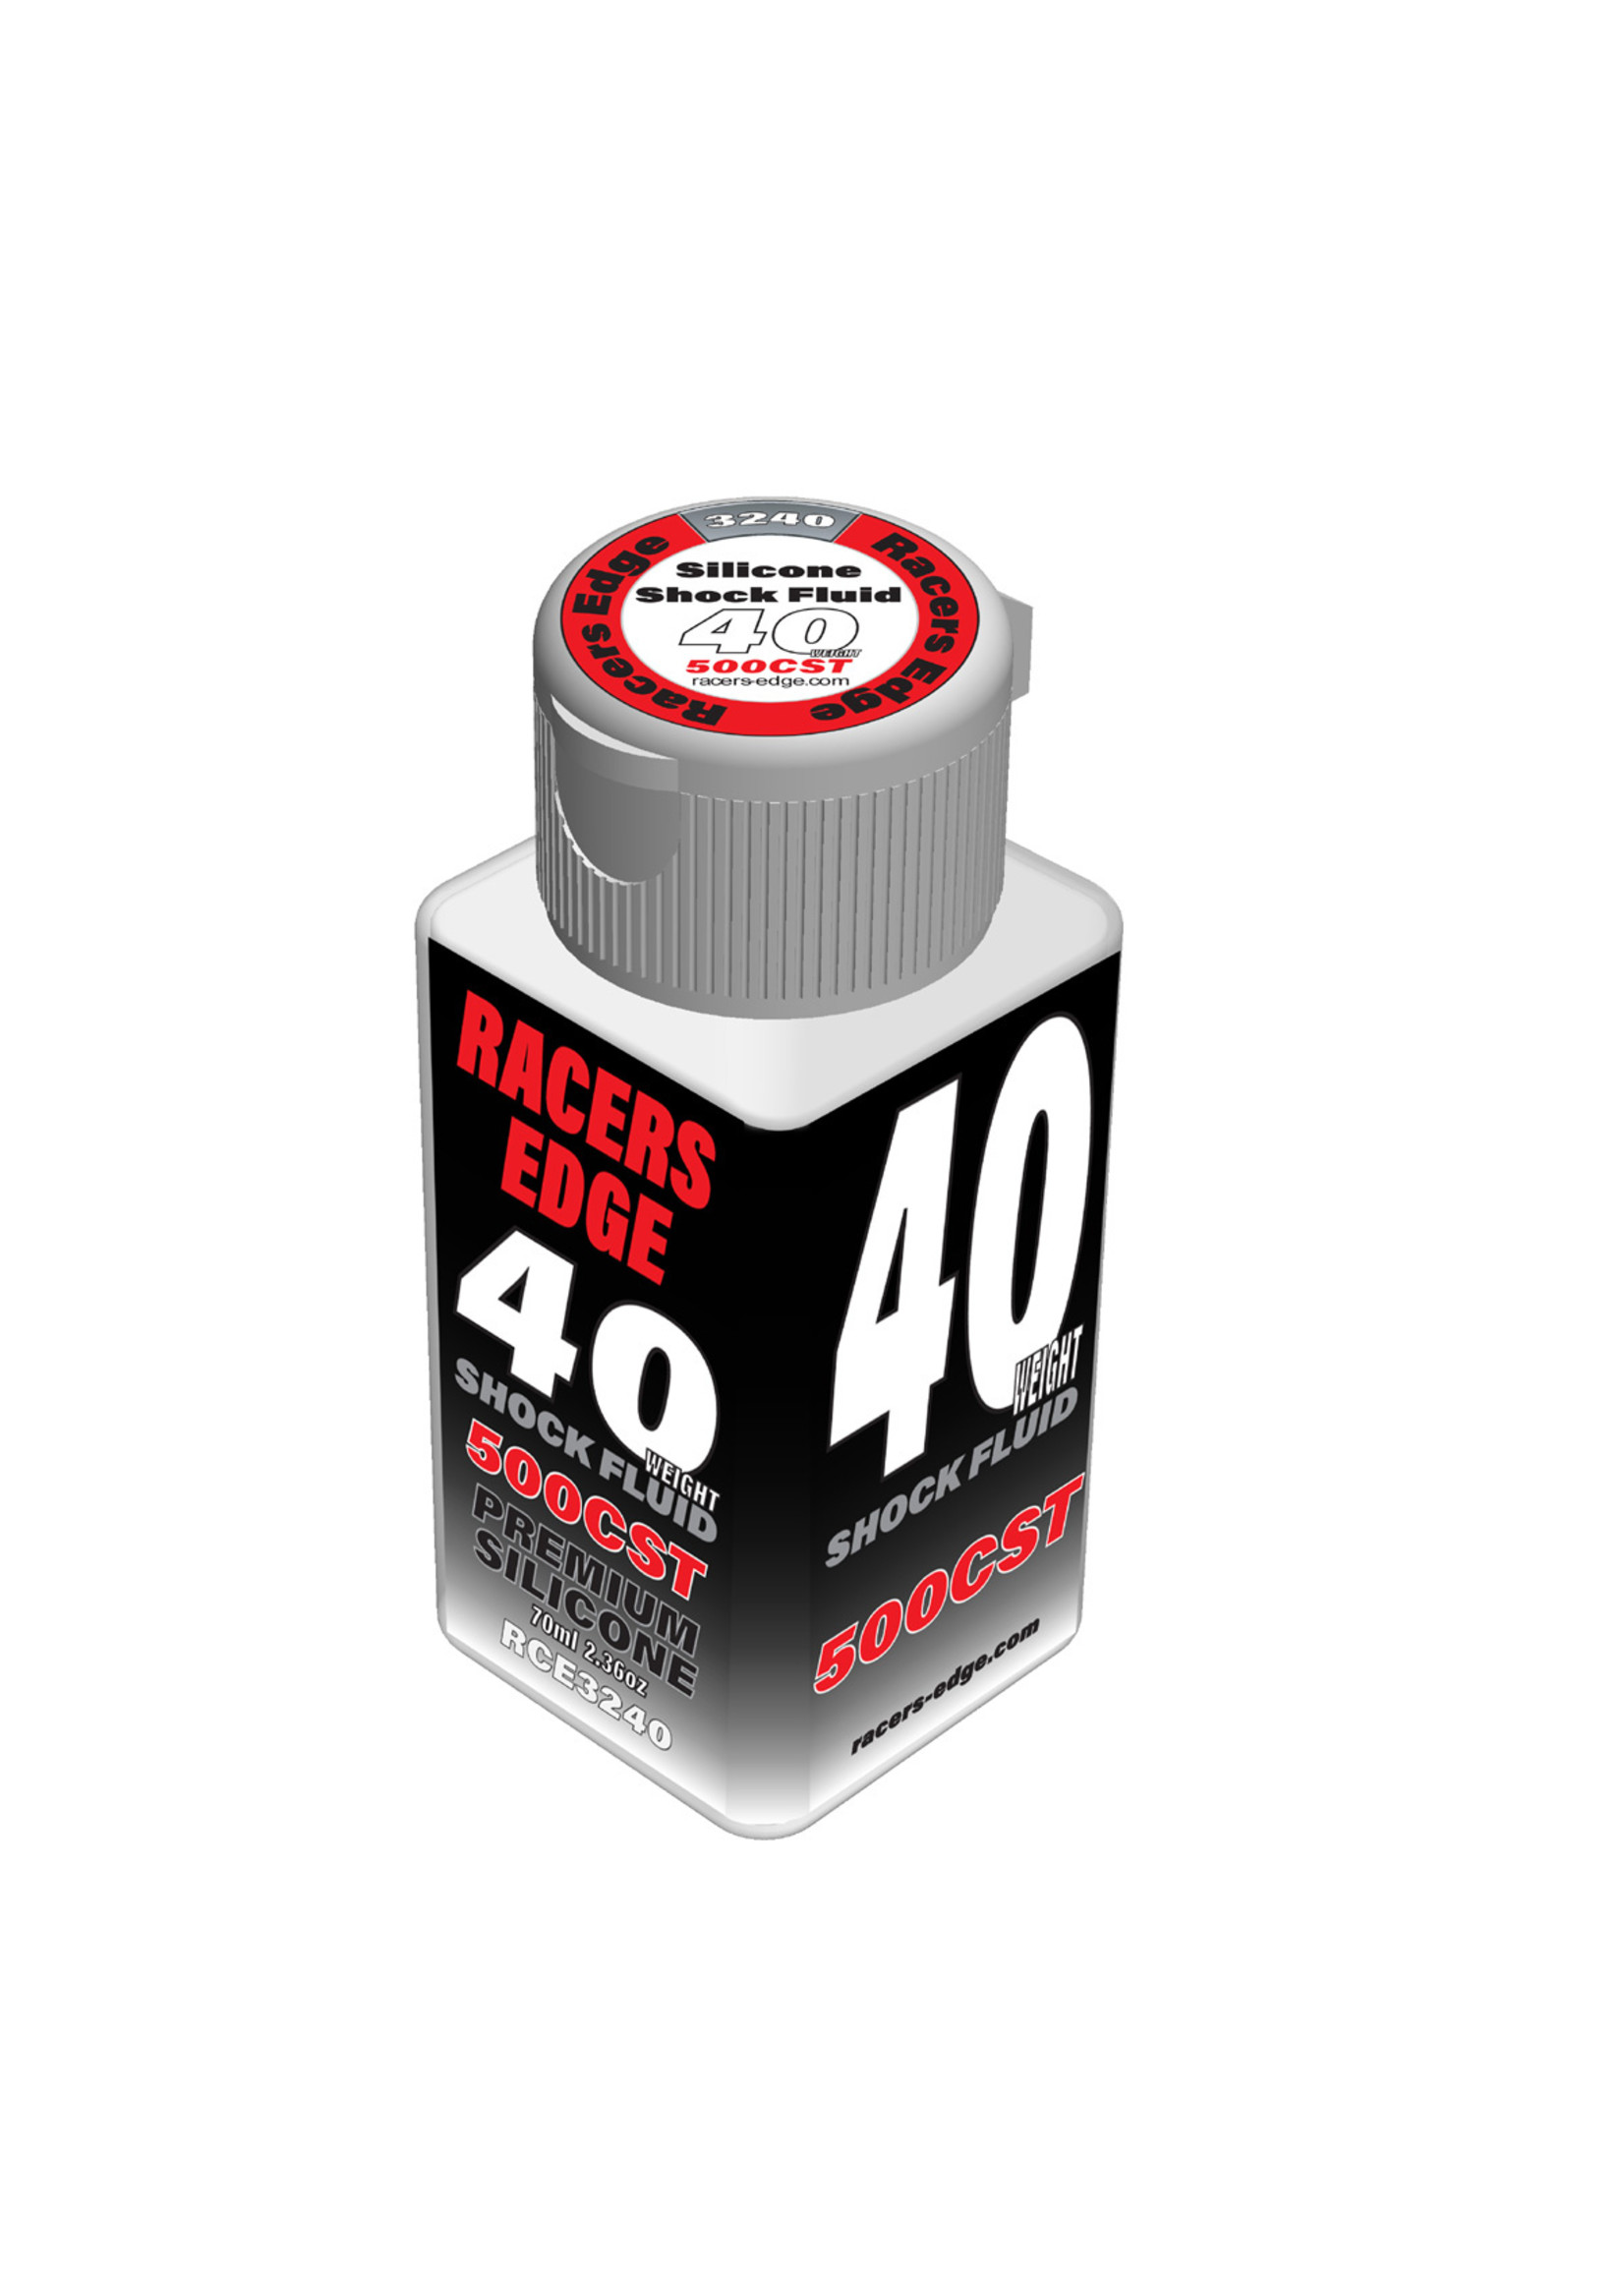 Racers Edge RCE3240 - 40 Weight, 500cSt, 70ml 2.36oz Pure Silicone Shock Oil